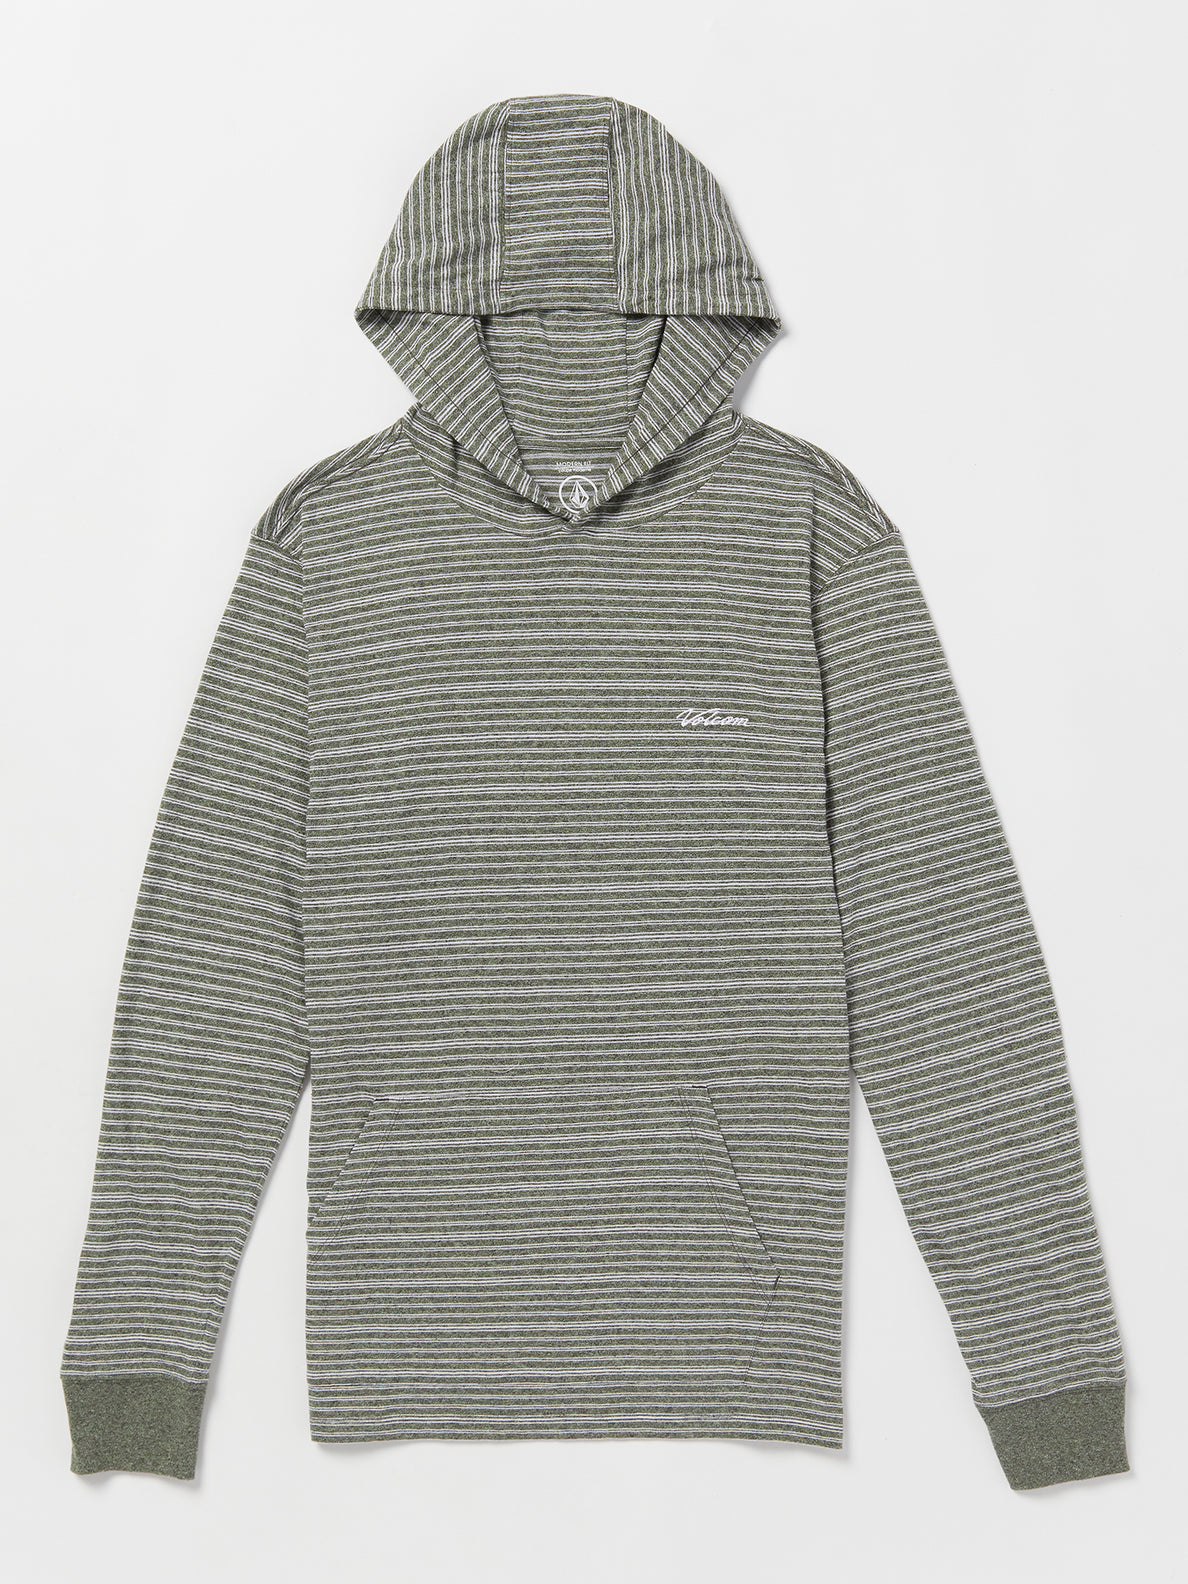 Static Stone Hooded Long Sleeve Shirt - Stealth (A0332301_STH) [F]